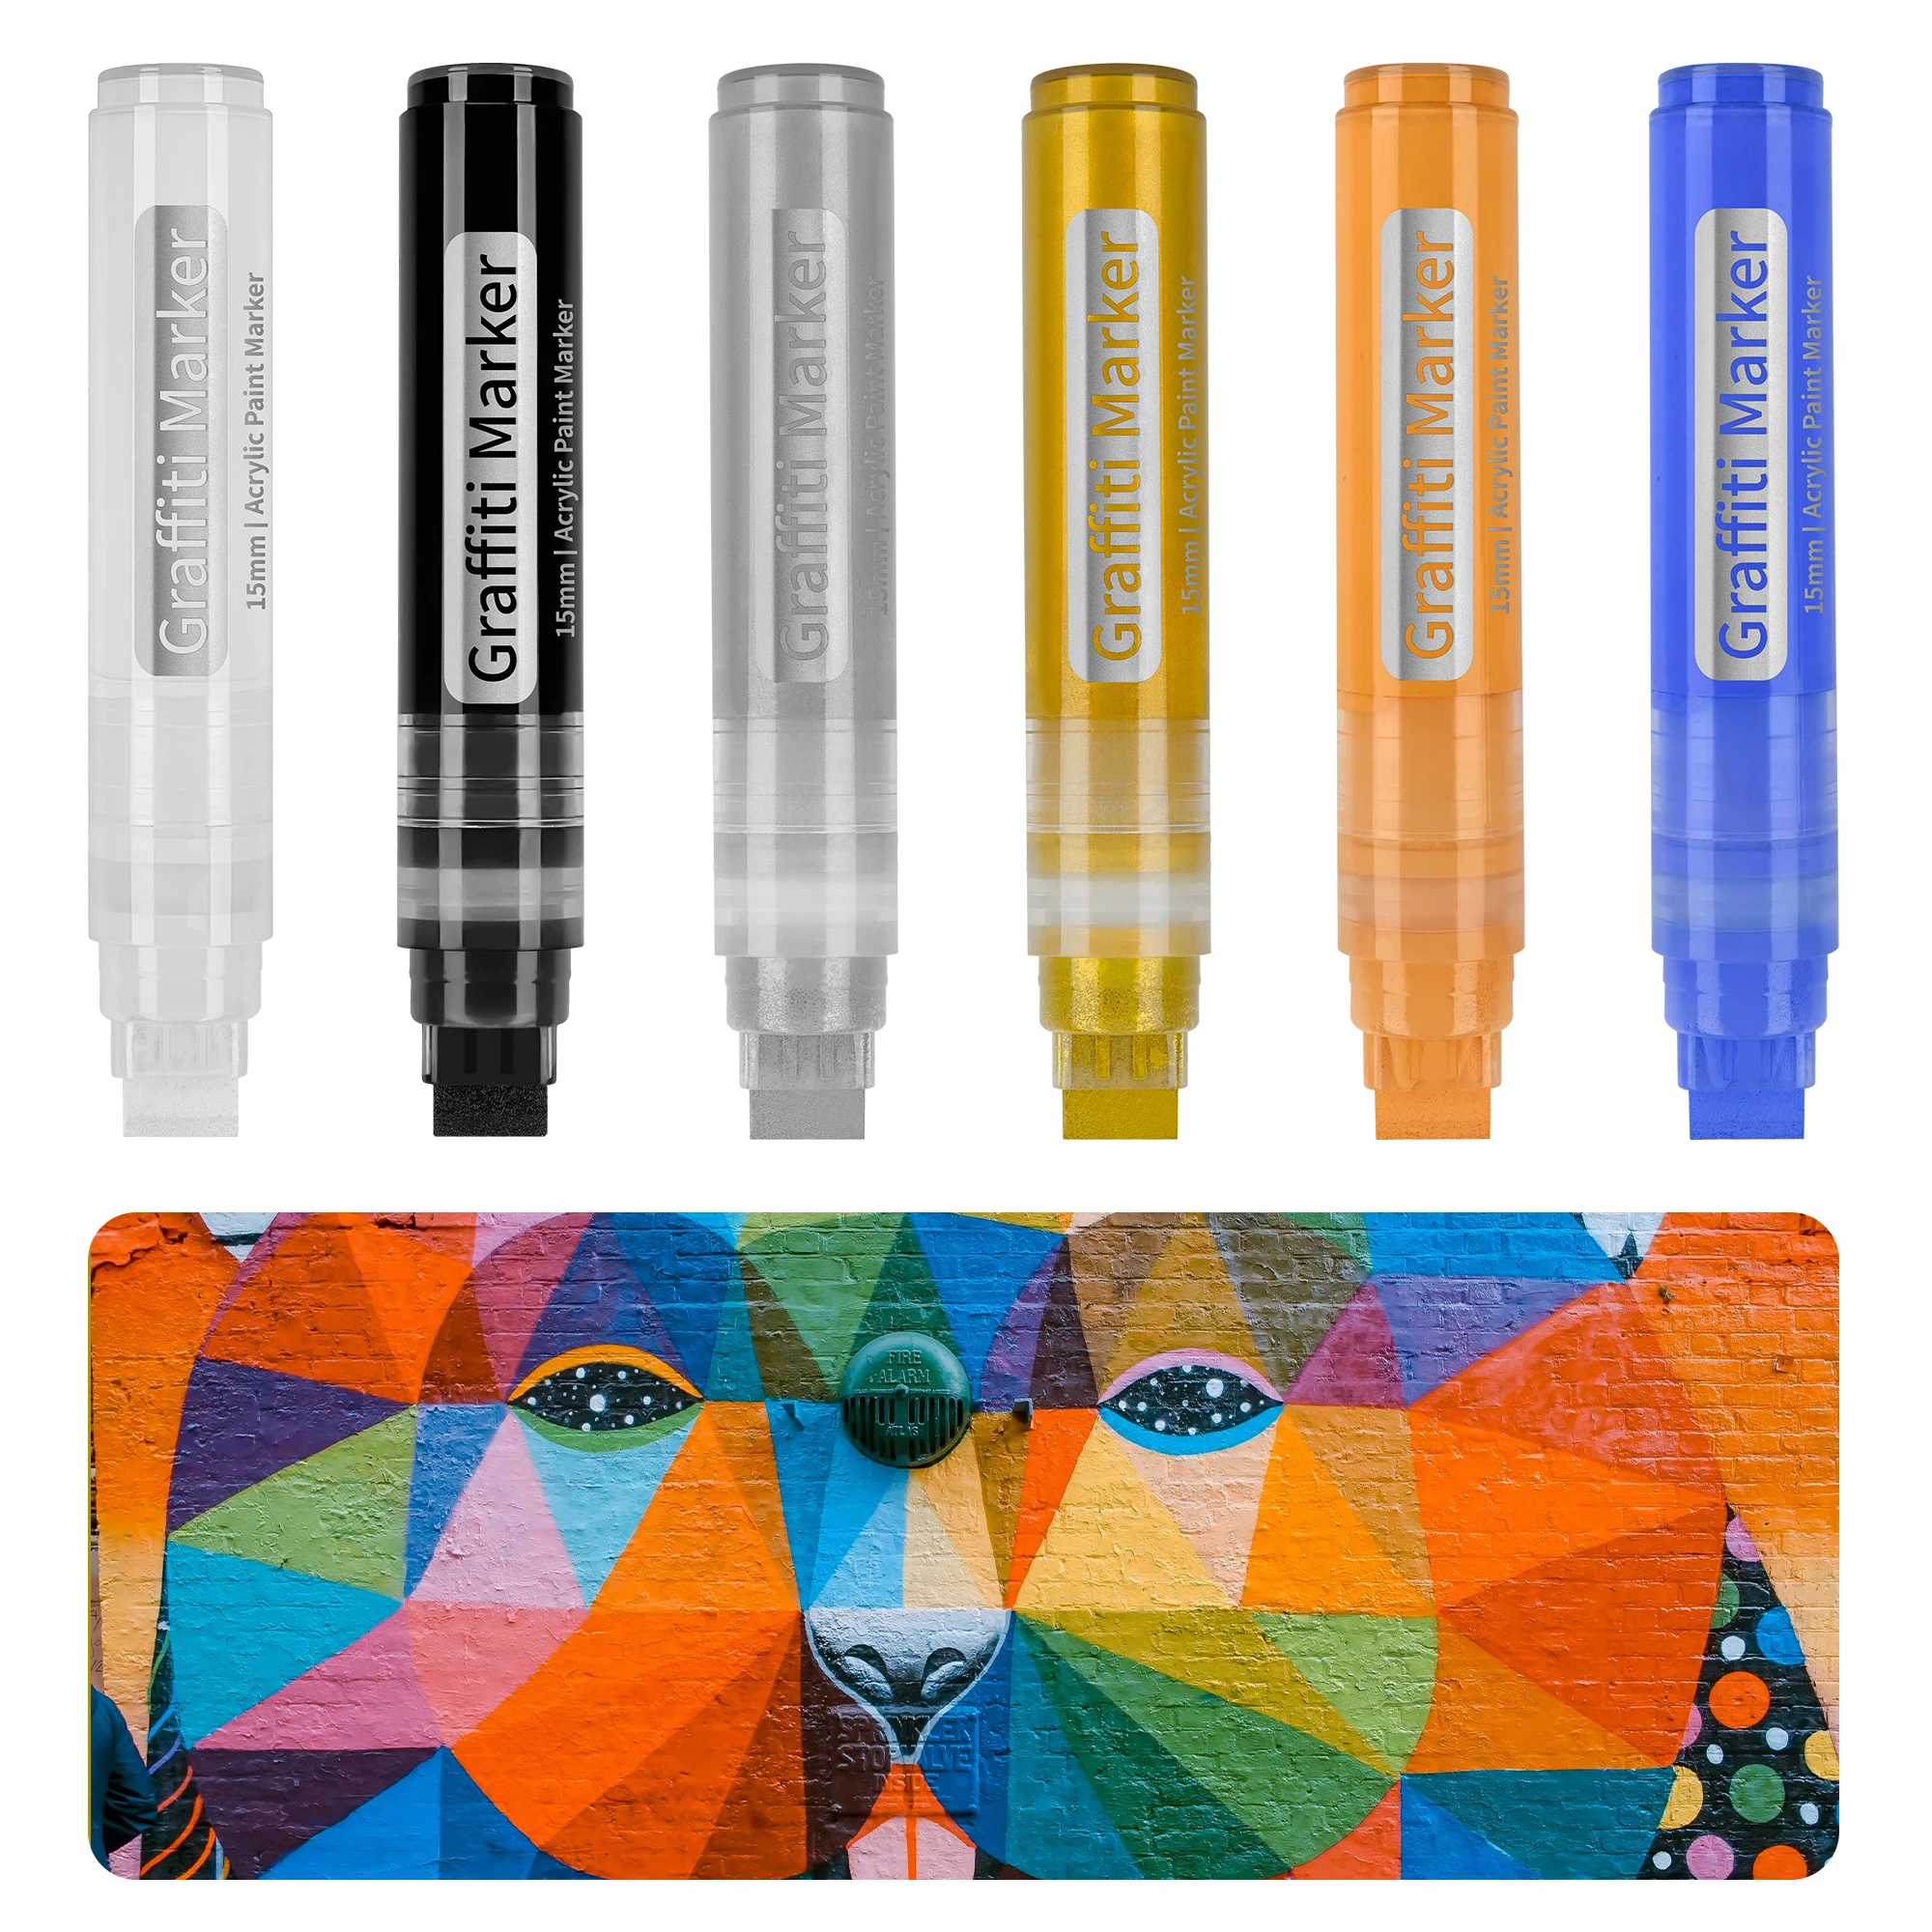 Jumbo Colored Marker, 15mm Jumbo Felt Tip, Waterproof and Permanent Ink Acrylic Paint Marker Pens for Rock Painting, Stone, Cera